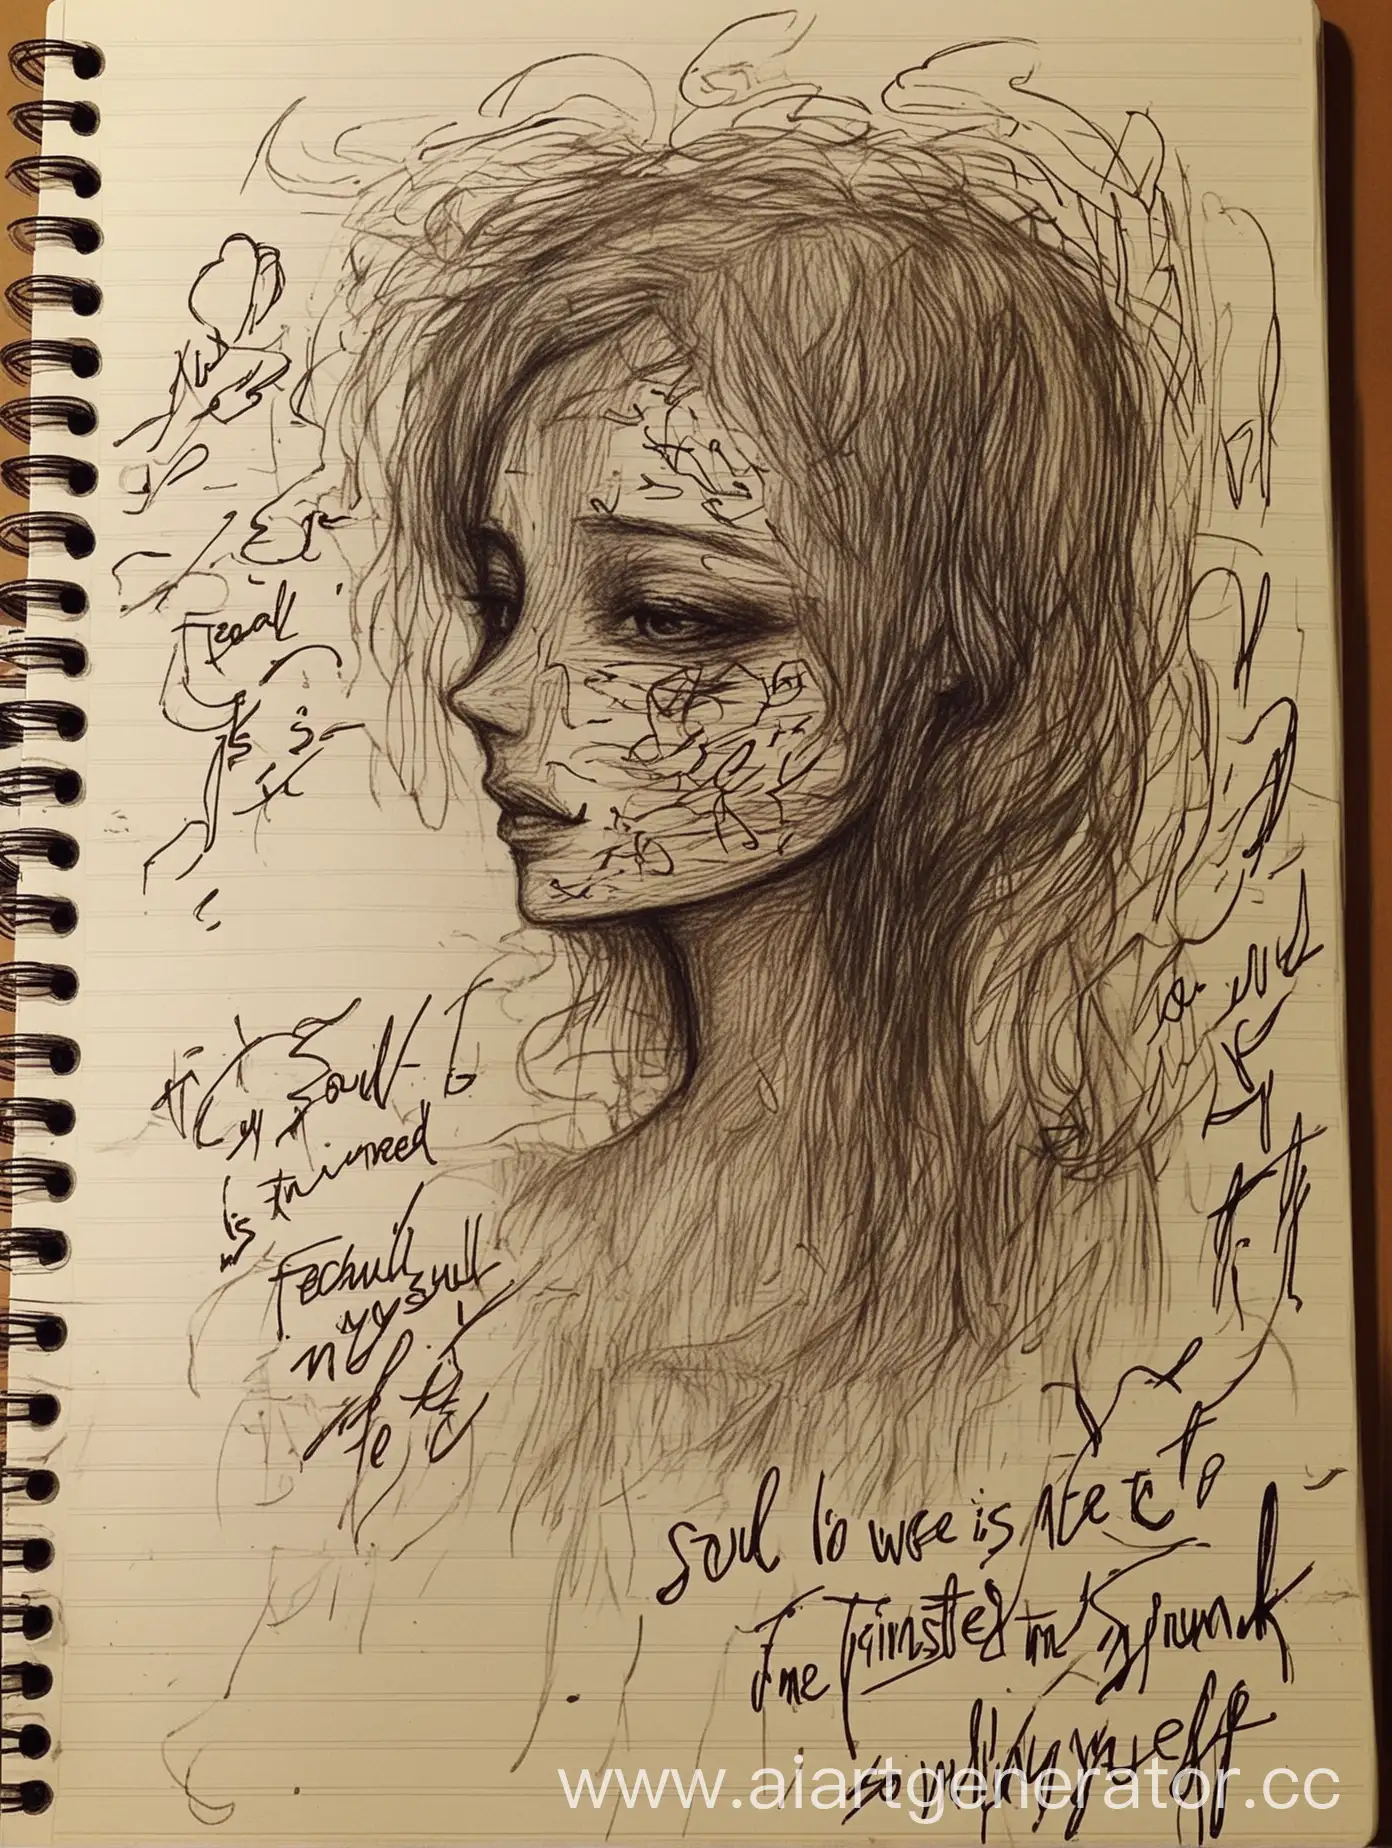 Scribbled-Notebook-with-Twisted-Soul-Creativity-Stained-and-Muse-Drunk